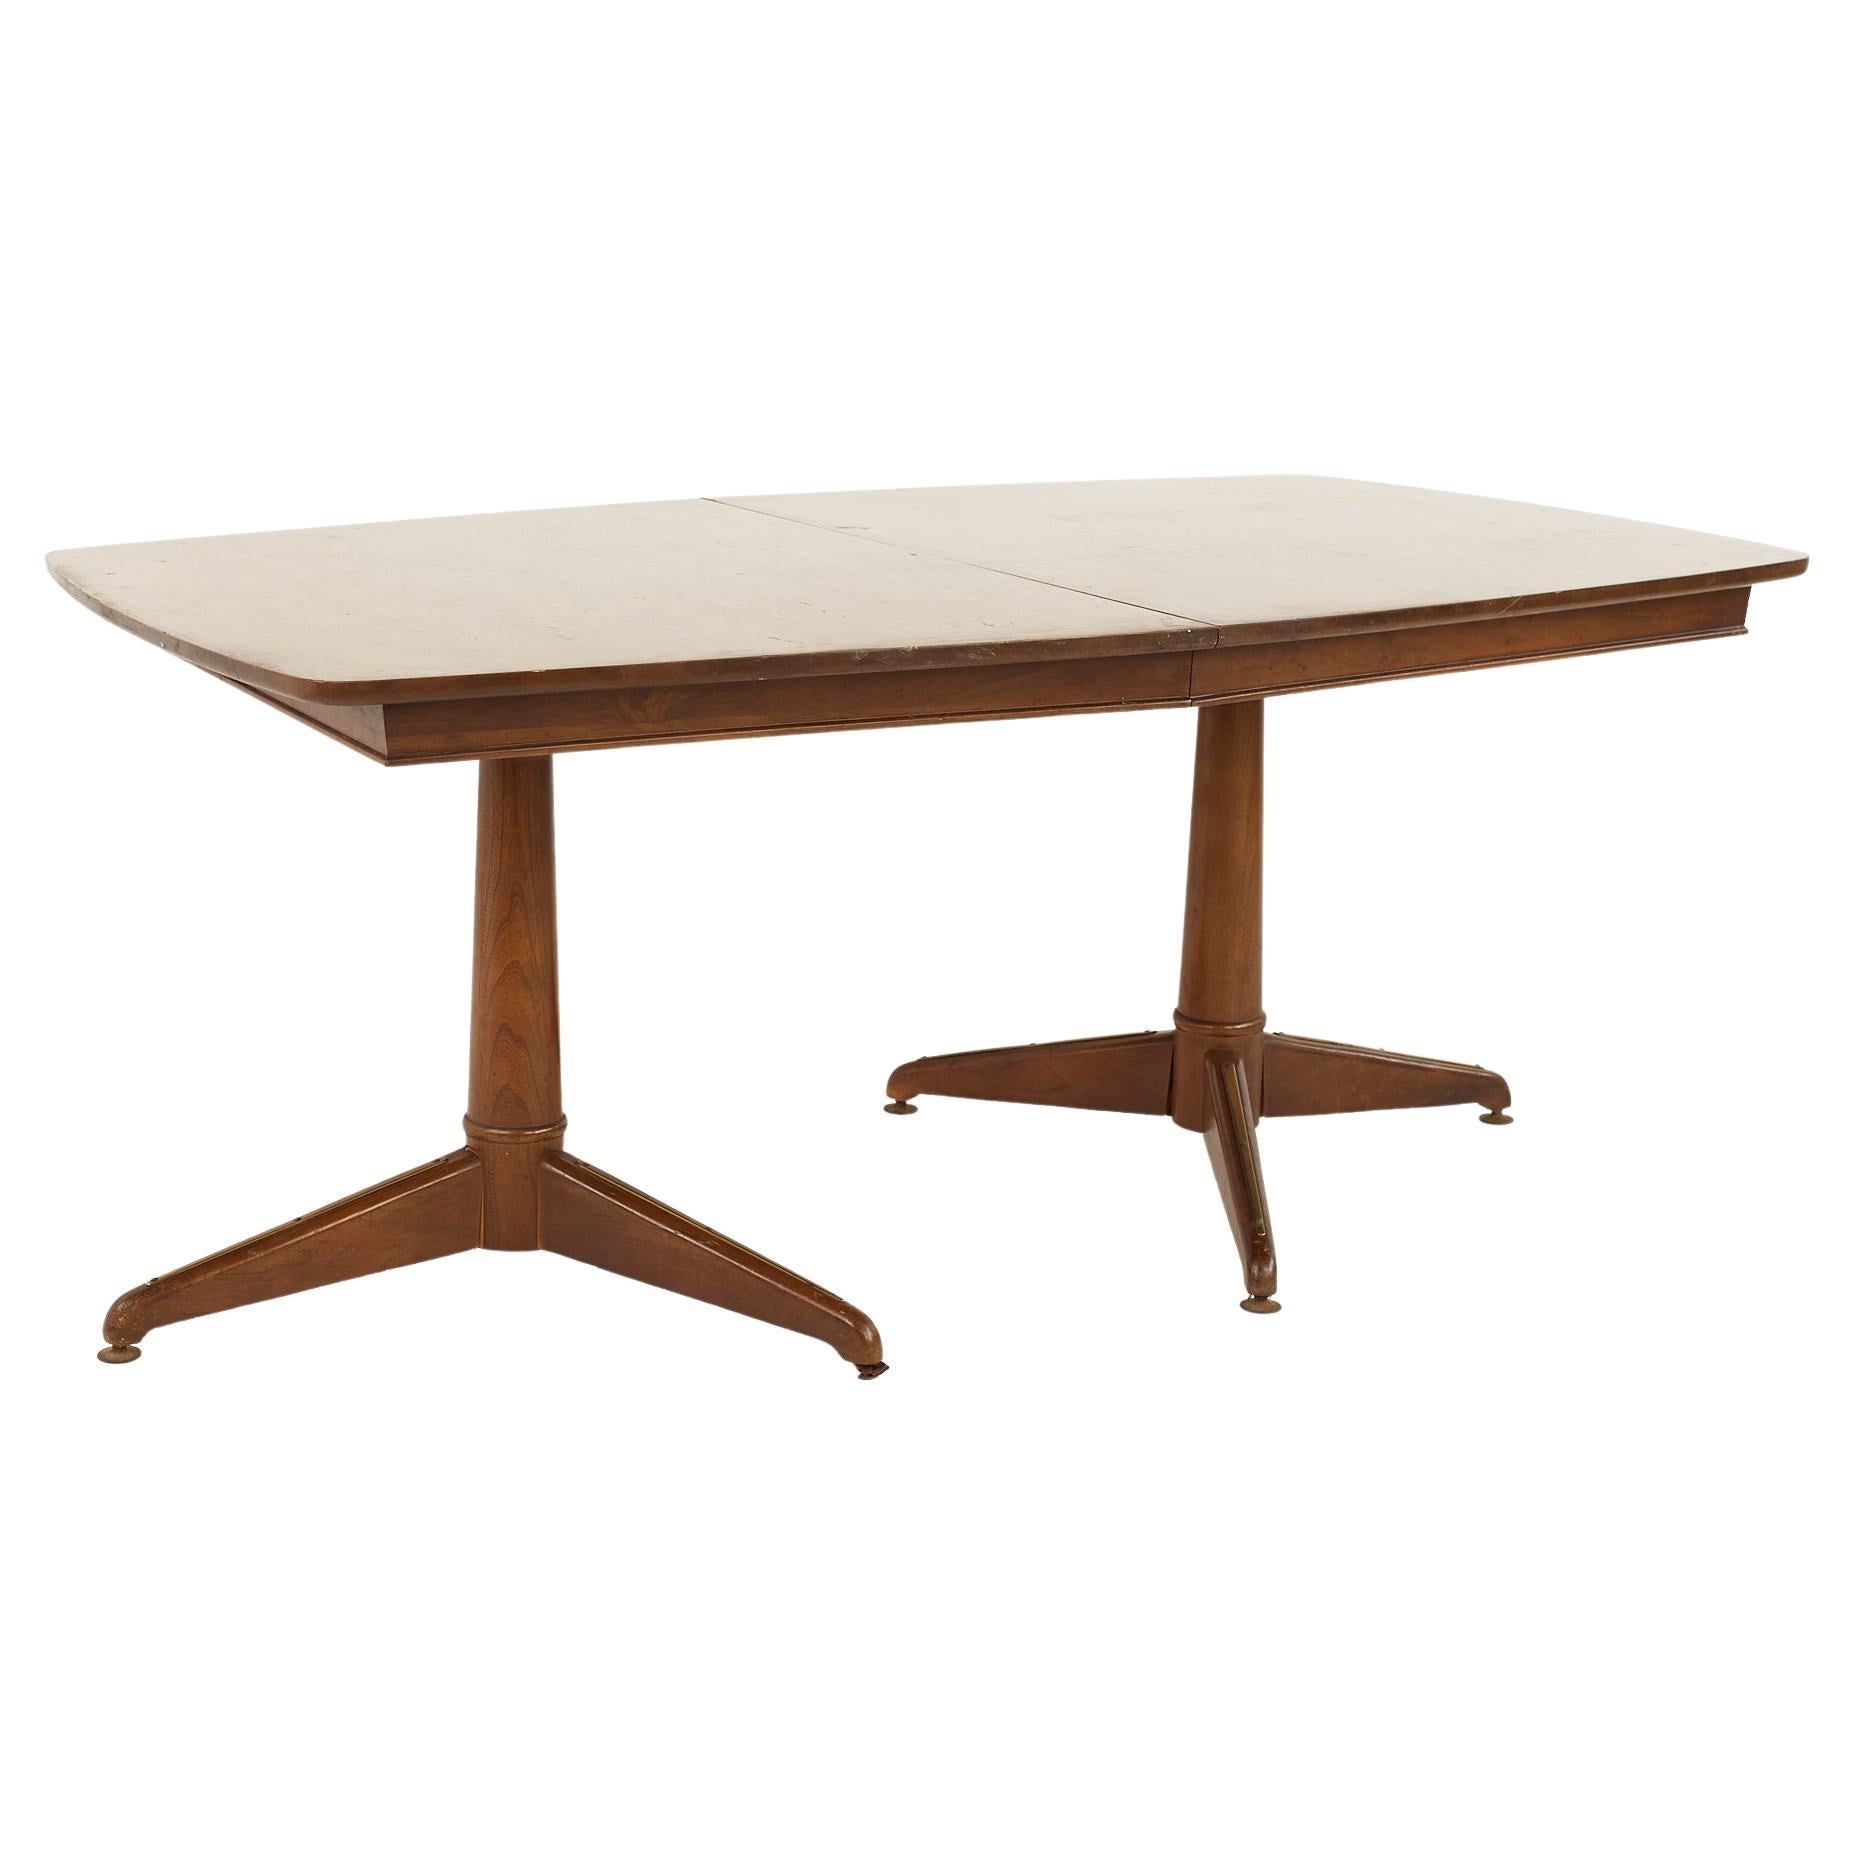 Kent Coffey Mid Century Pedestal Base 10 Seat Walnut Dining Table For Sale